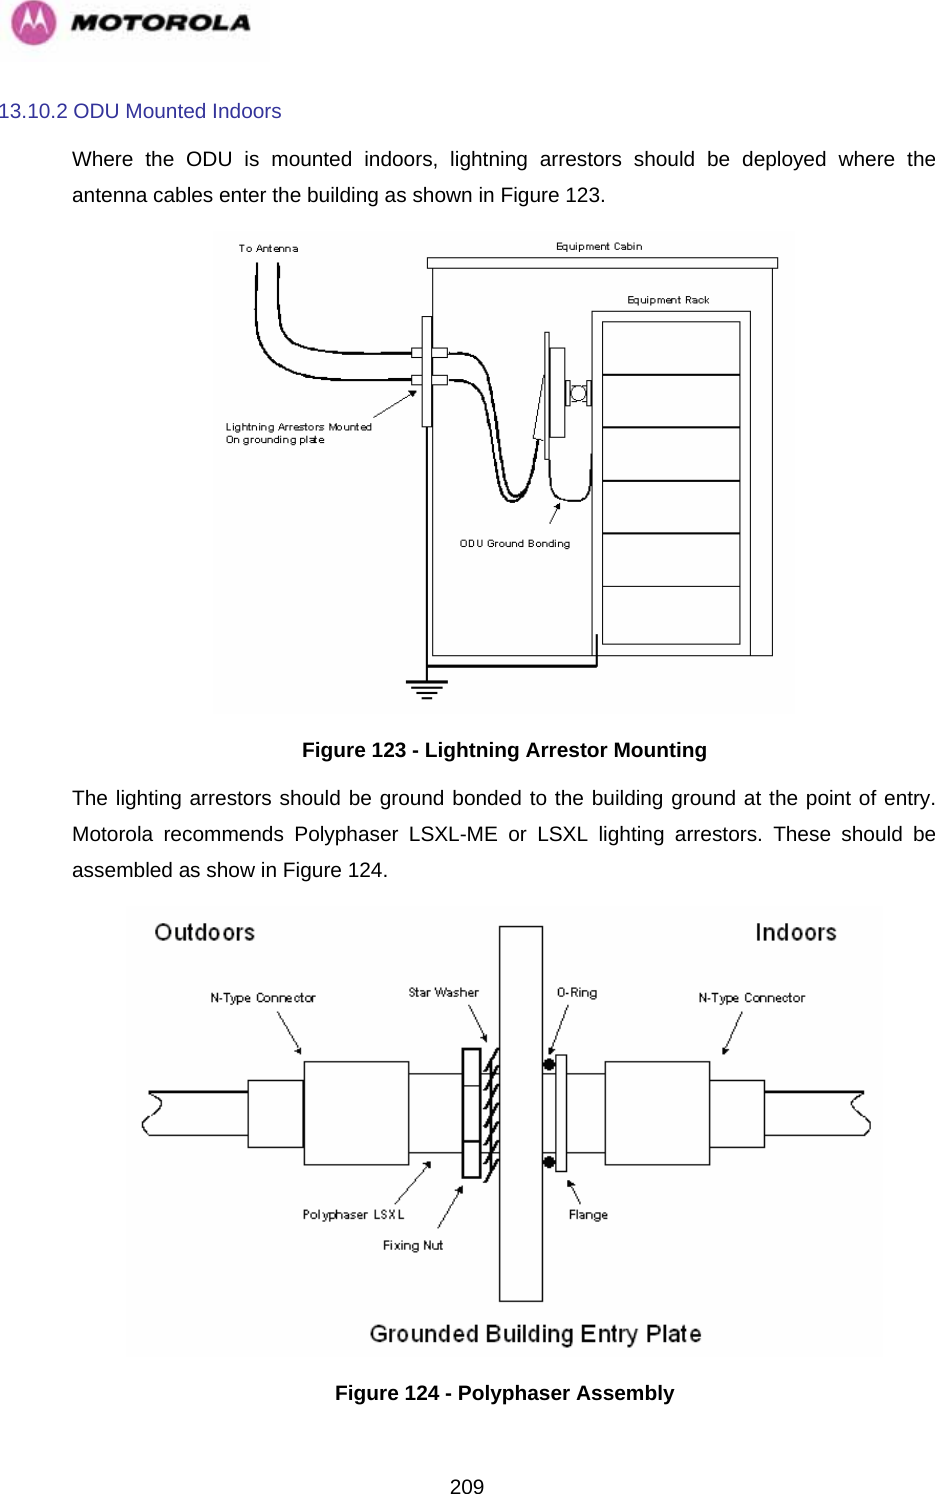   20913.10.2 ODU Mounted Indoors Where the ODU is mounted indoors, lightning arrestors should be deployed where the antenna cables enter the building as shown in Figure 123.  Figure 123 - Lightning Arrestor Mounting The lighting arrestors should be ground bonded to the building ground at the point of entry. Motorola recommends Polyphaser LSXL-ME or LSXL lighting arrestors. These should be assembled as show in Figure 124.  Figure 124 - Polyphaser Assembly 